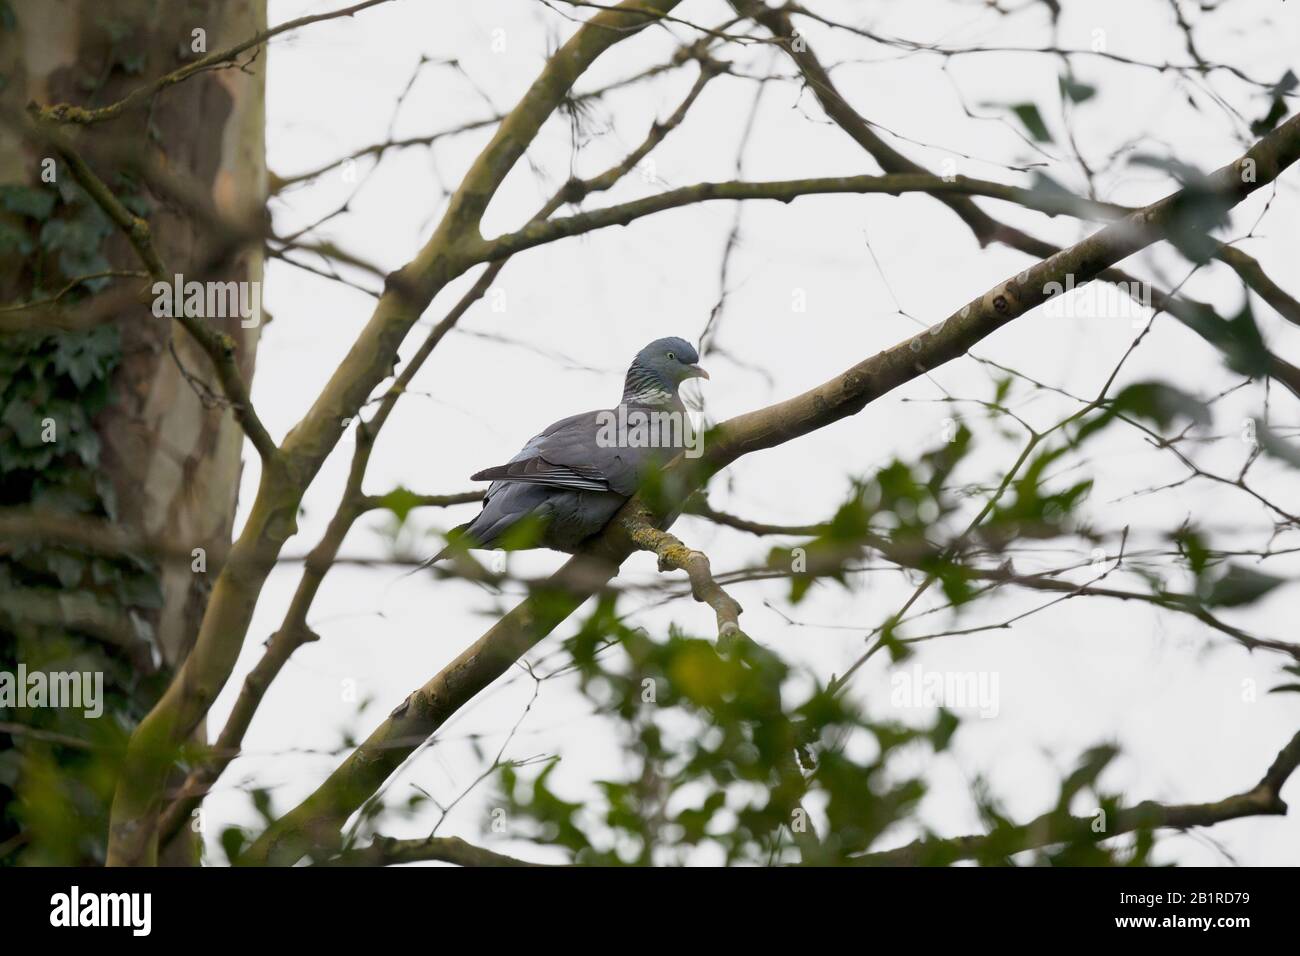 A woodpigeon sits in the bare branches of a tree. Wintertime, southern UK. Stock Photo